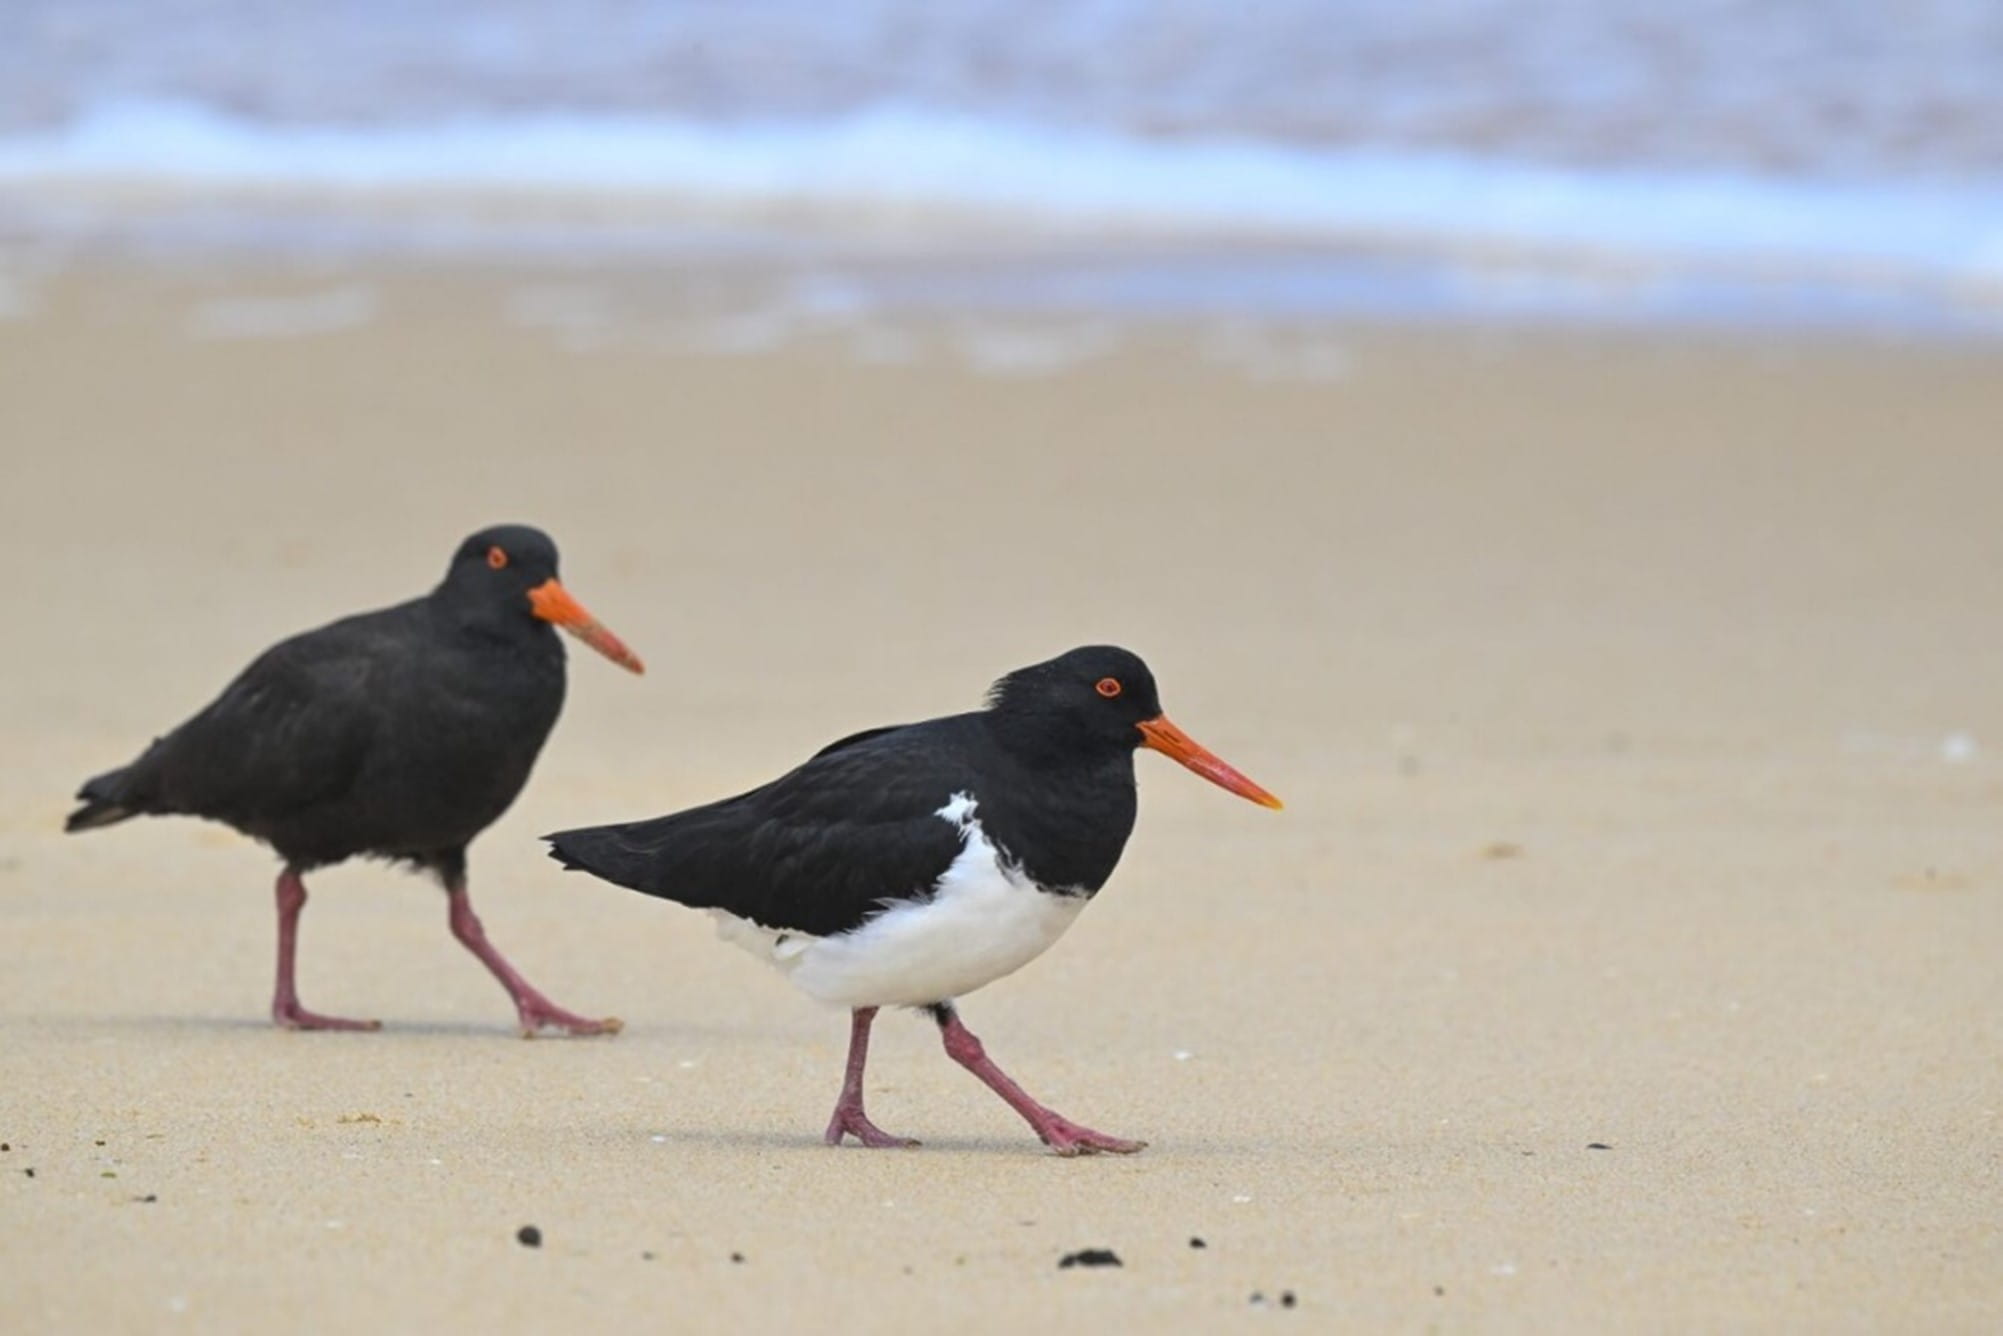 A Pied Oysterctacher stands in the middle of the image on the beach. A Sooty Oystercatcher is standing behind it. 